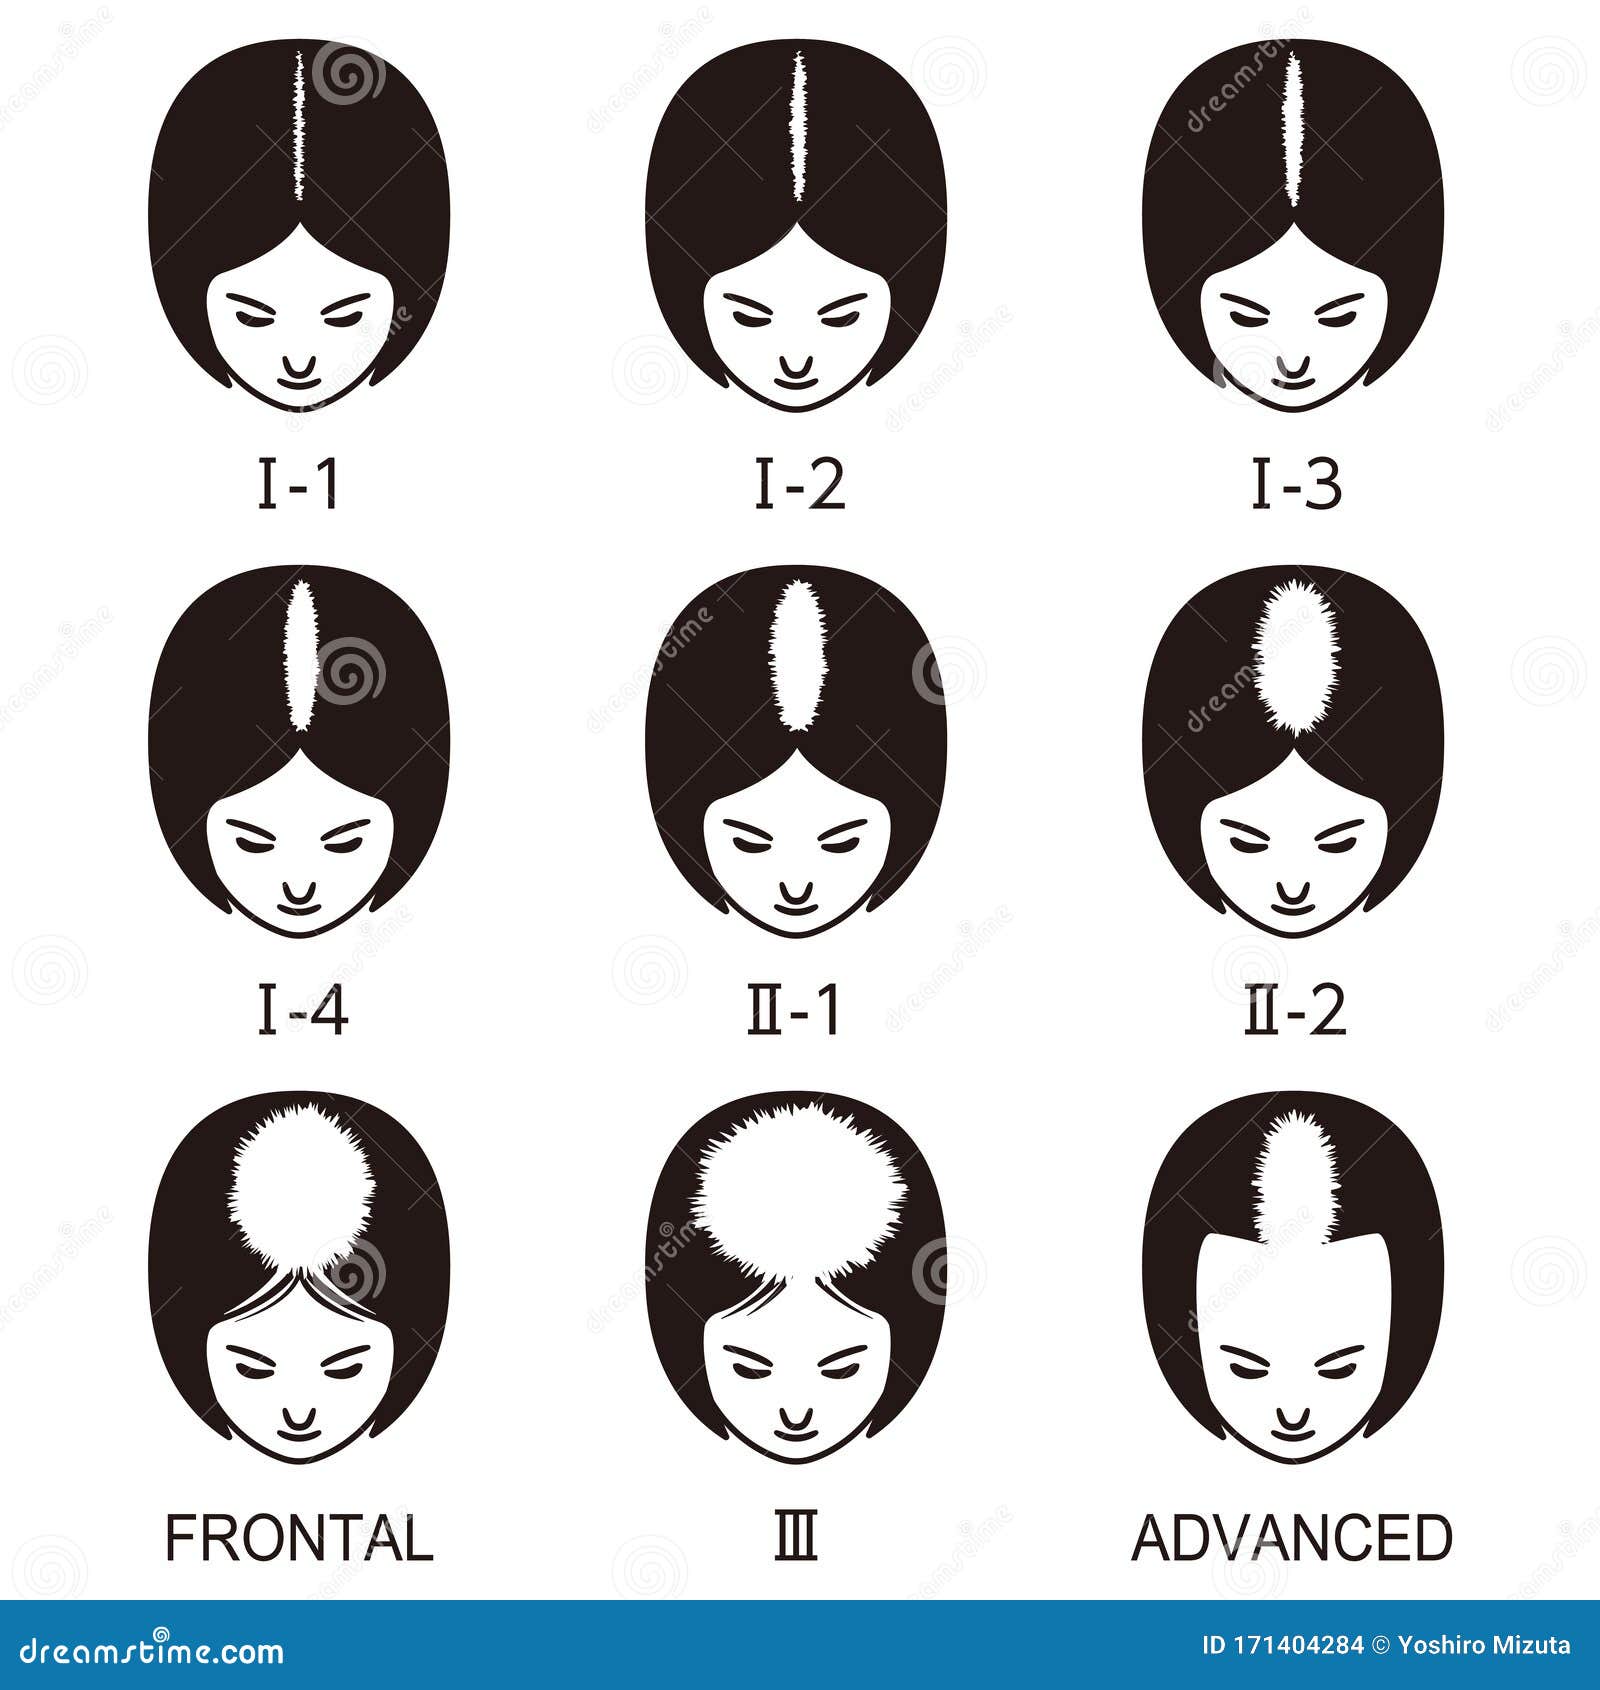 Norwood-Hamilton scale: the 7 stages of male pattern baldness